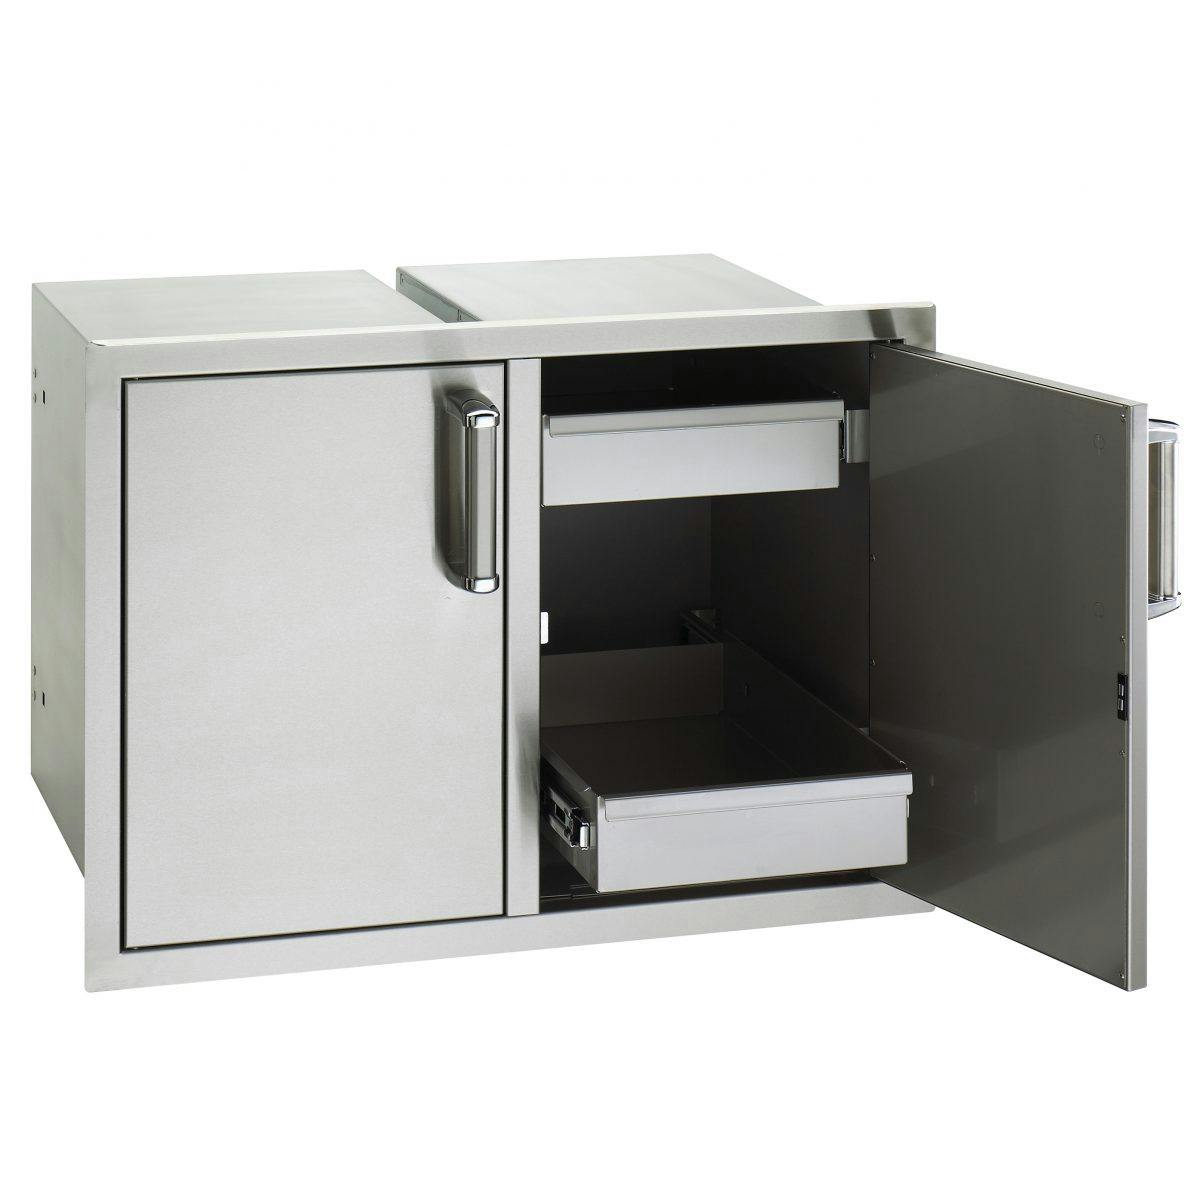 Fire Magic Flush Double Doors with Dual Drawers